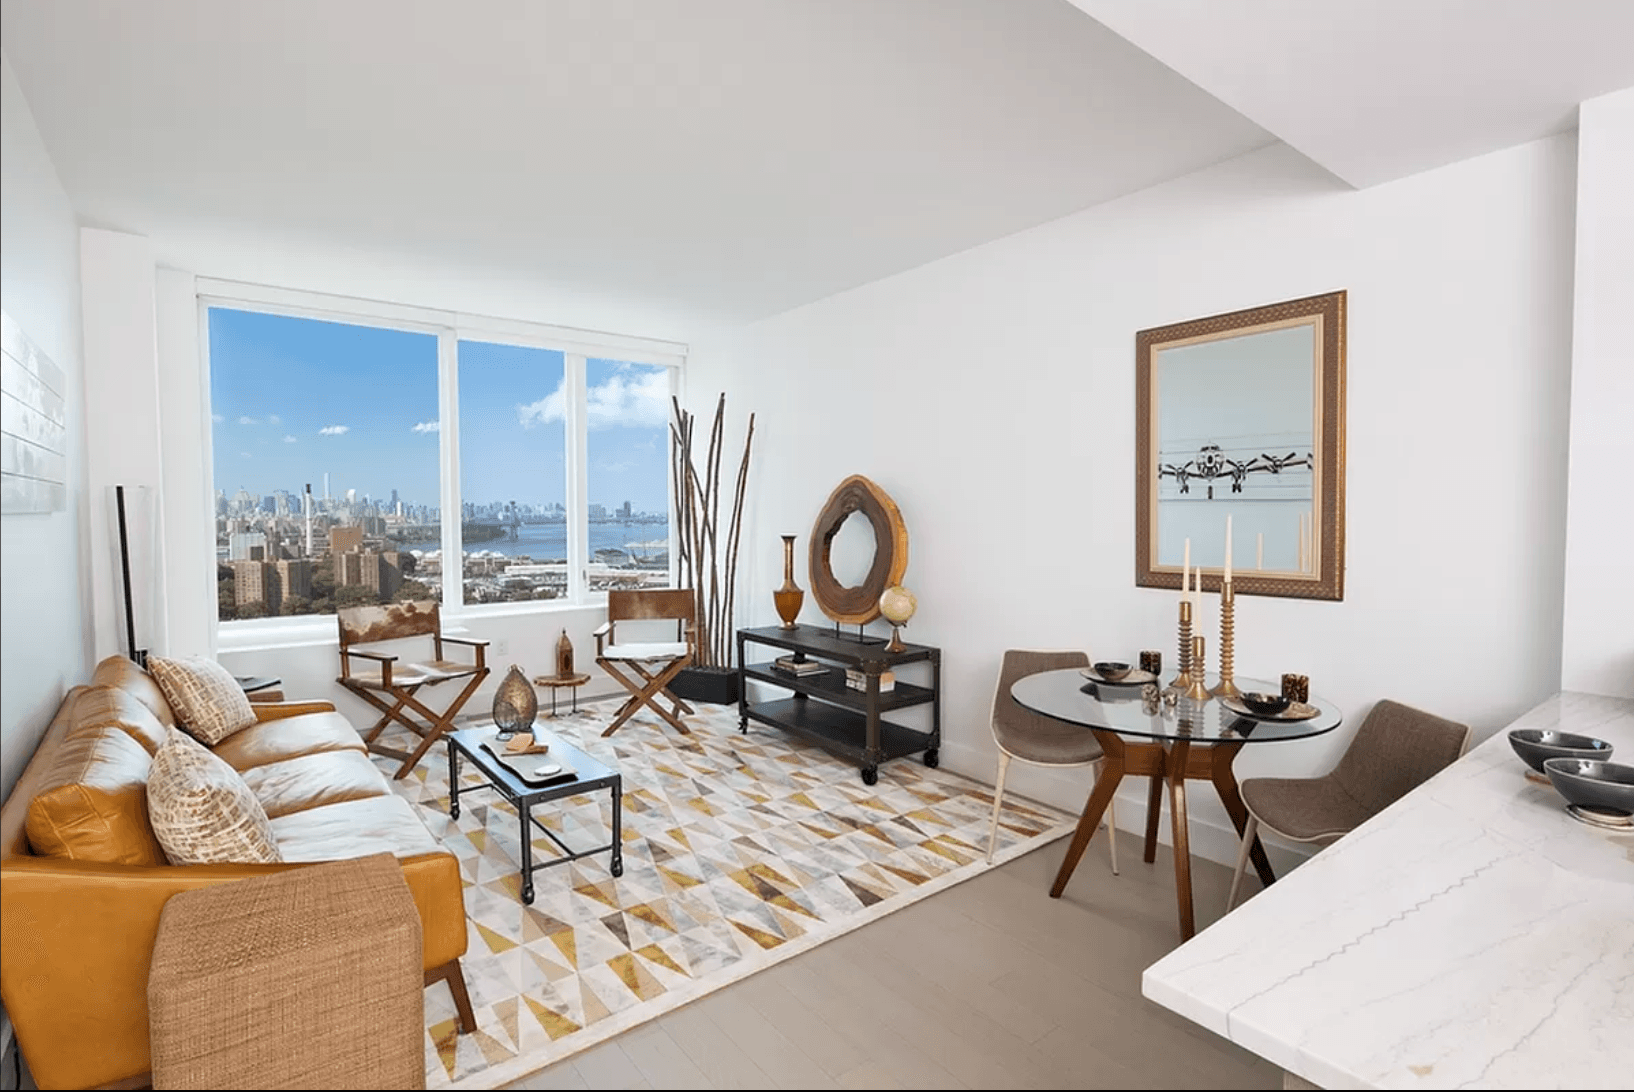 South & West Facing Corner 1 Bed/ 1 Bath Luxury Apartment, 161 Sq Ft Private Terrace, Extra High Ceilings, Oversized Bathroom W/ Soaker Tub & Oak Vanity W/ Quartzite Countertops, W/D in Unit